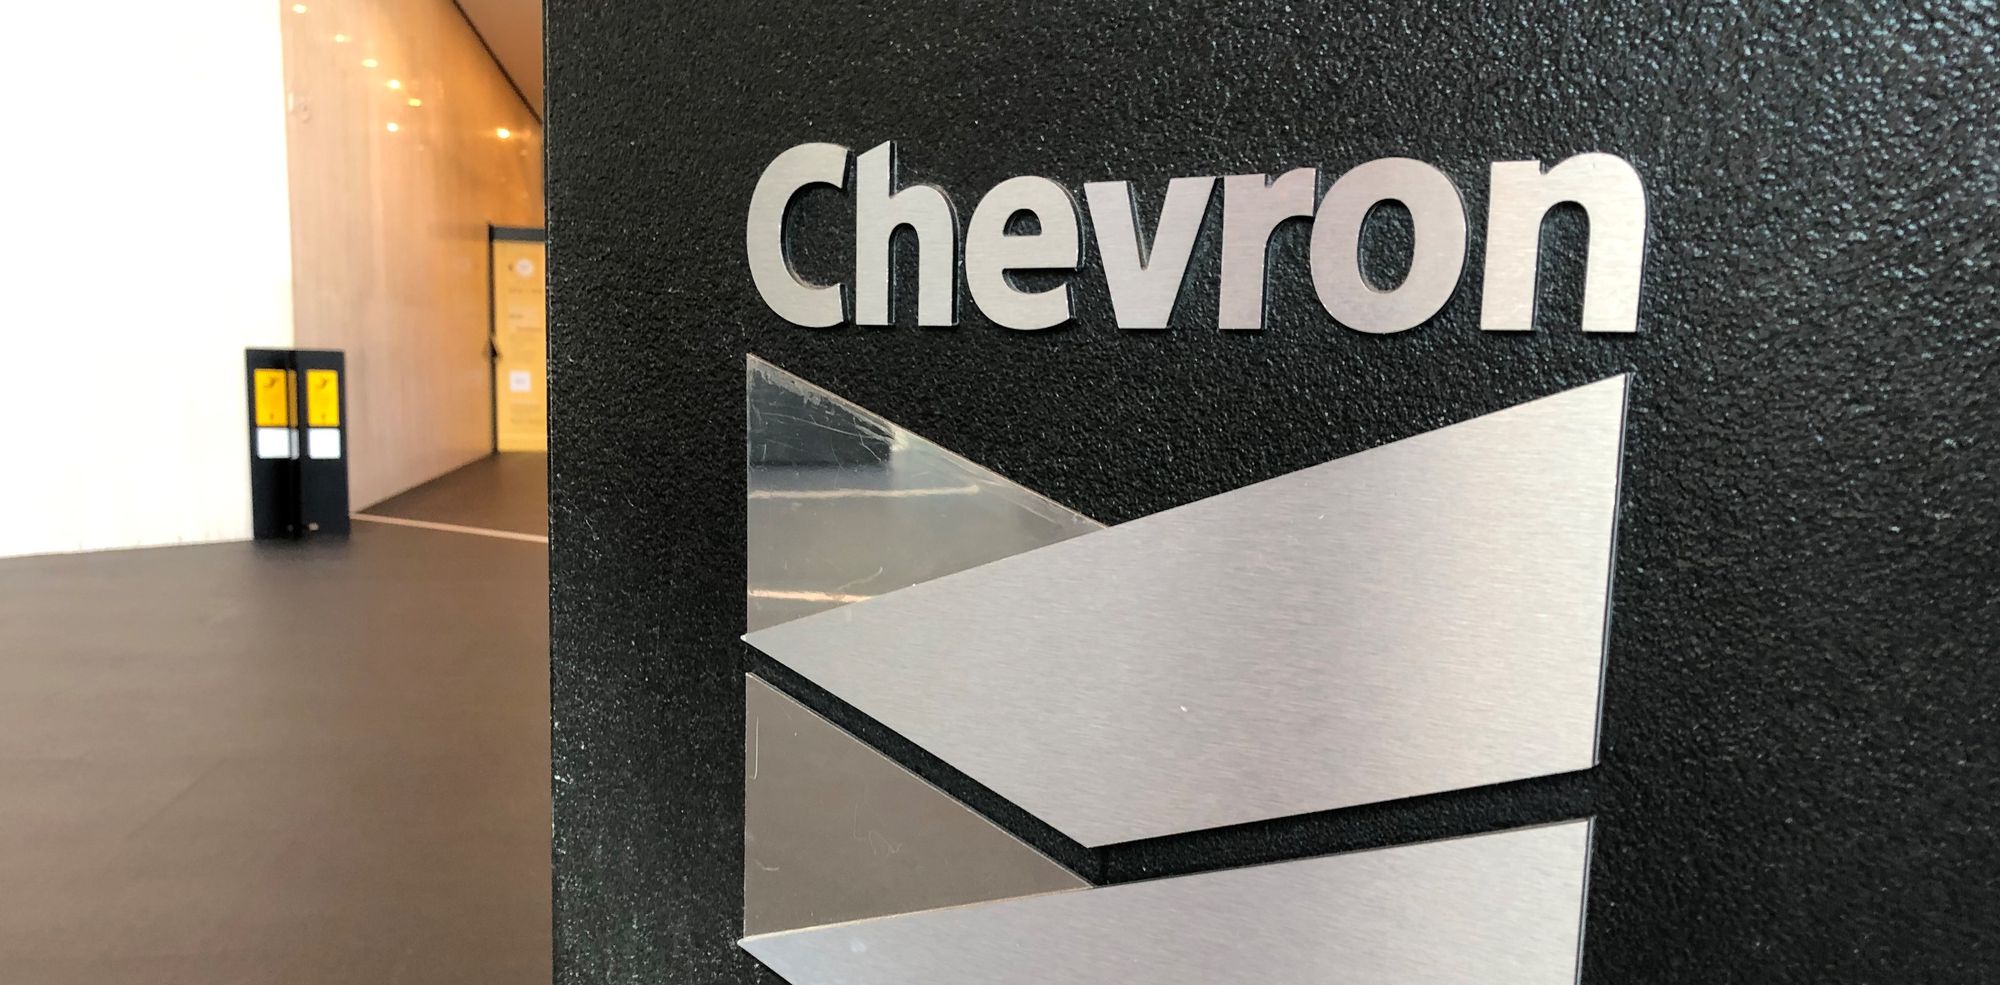 Chevron reaps $32m a day from Australian gas